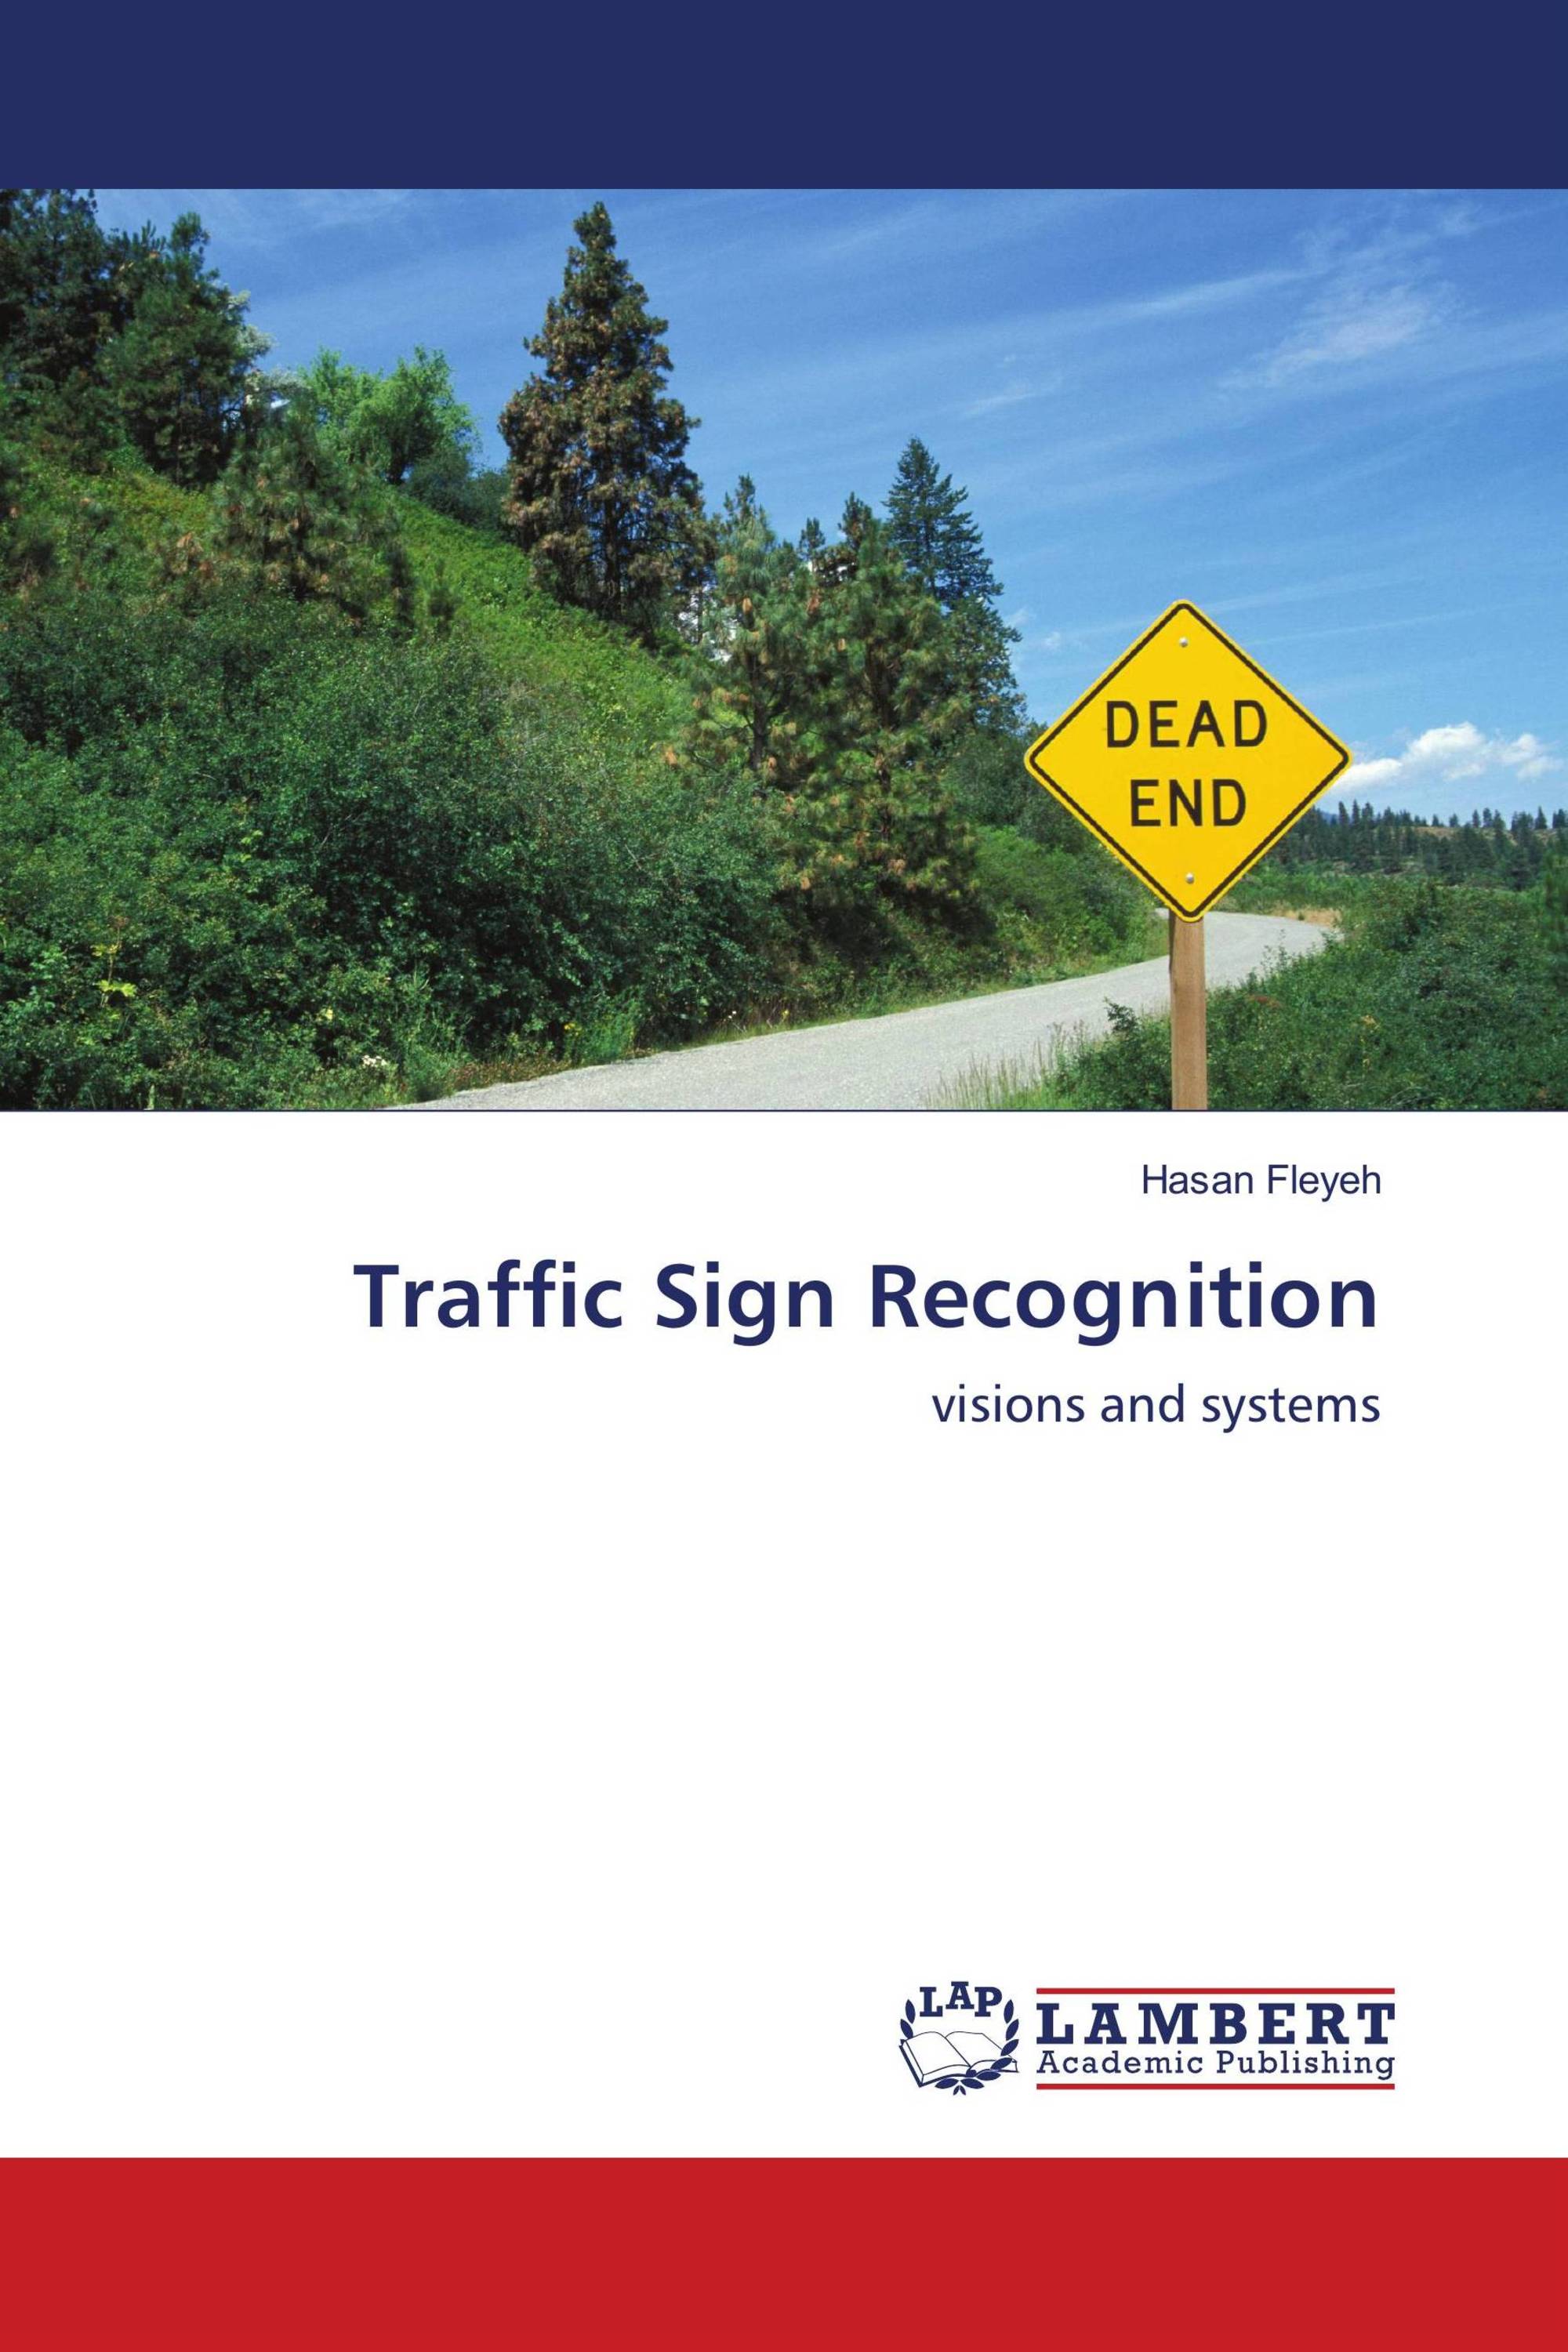 literature review for traffic sign recognition